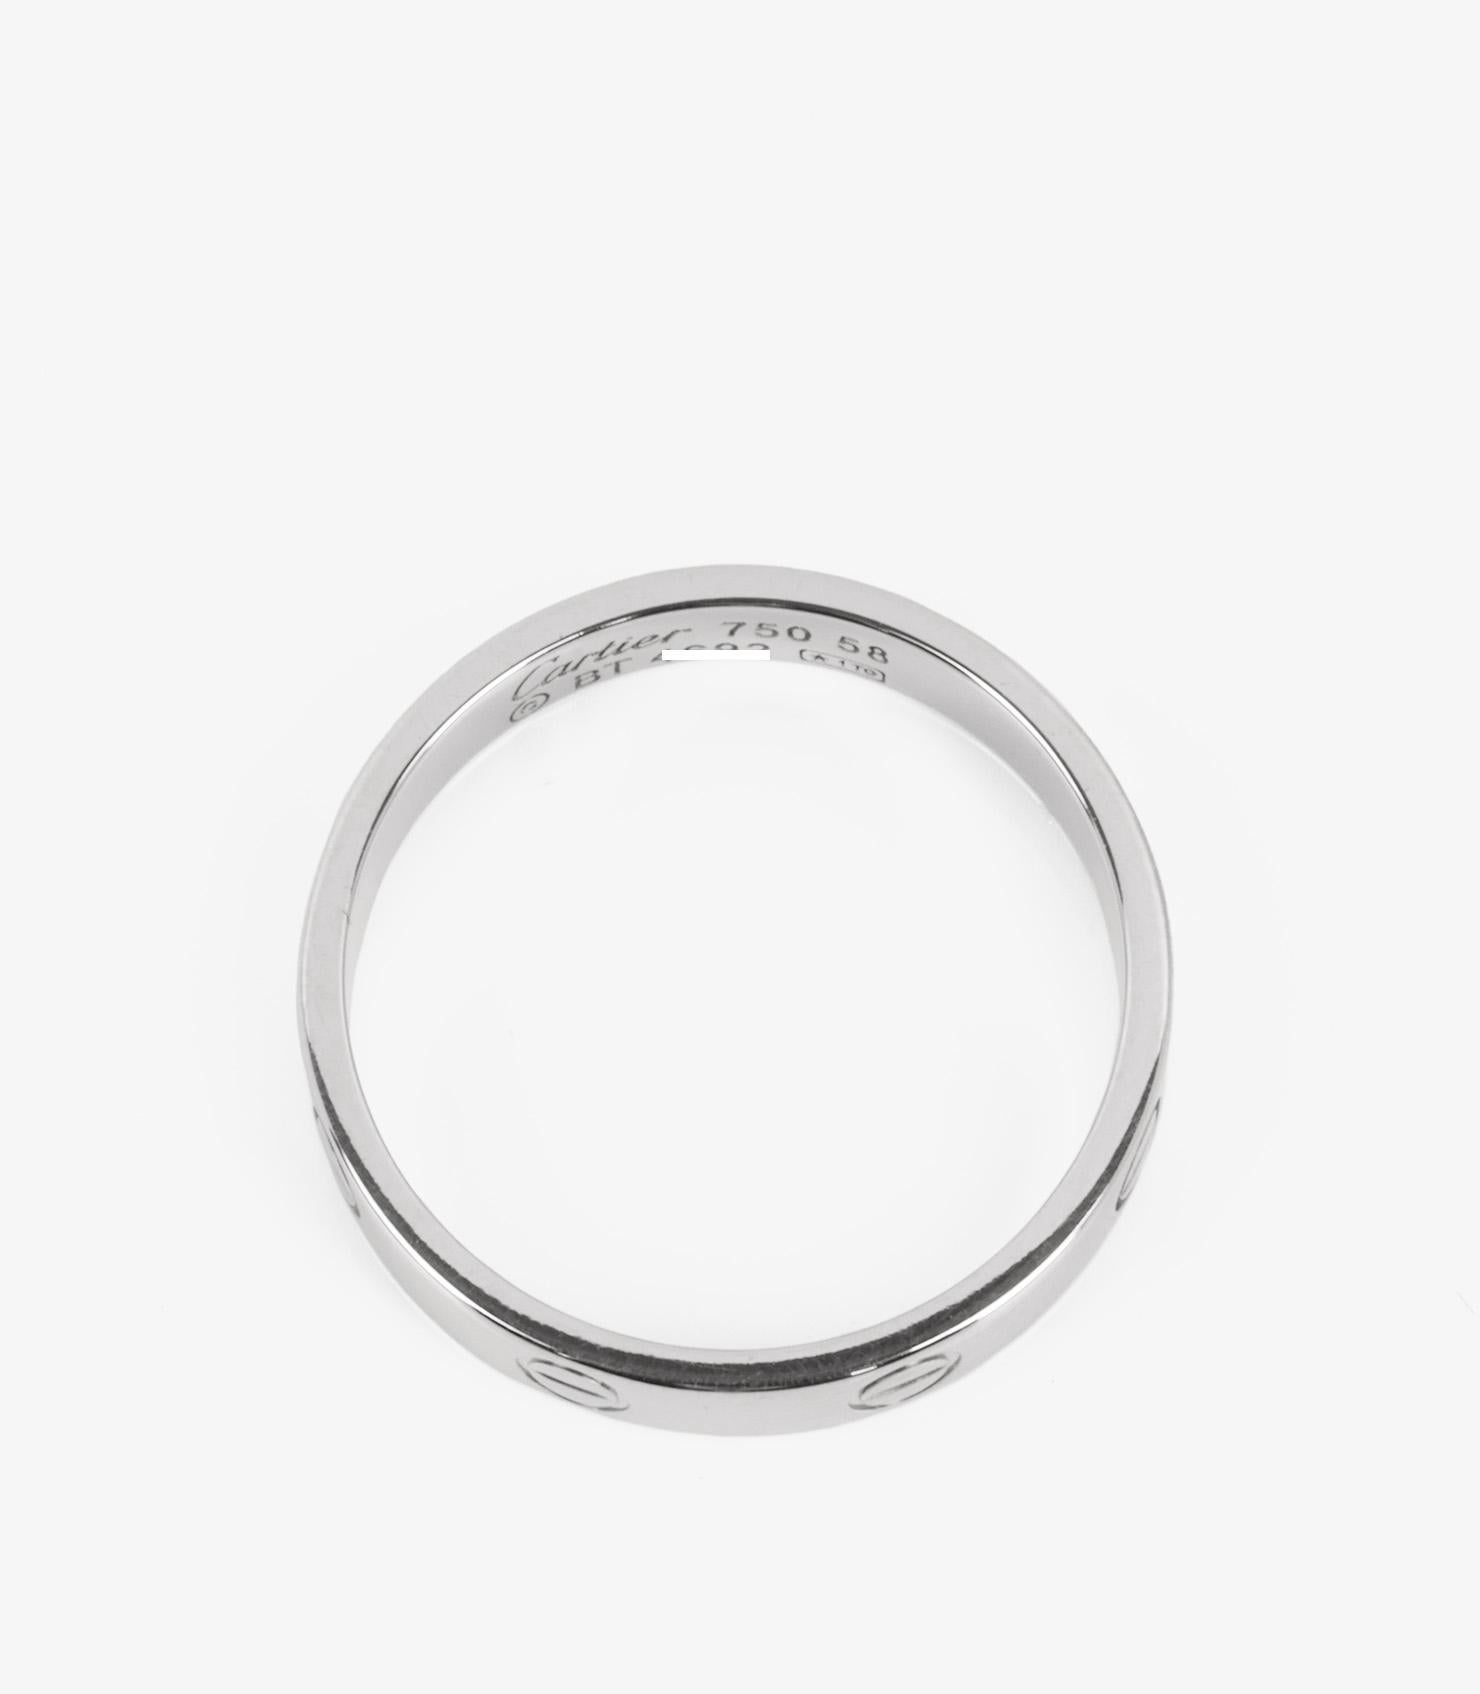 Cartier 18ct White Gold Love Wedding Band

Brand- Cartier
Model- Love Wedding Band
Product Type- Ring
Serial Number- BT****
Material(s)- 18ct White Gold
UK Ring Size- Q 1/2
EU Ring Size- 58
US Ring Size- 8 1/4
Resizing Possible- No

Band Width-